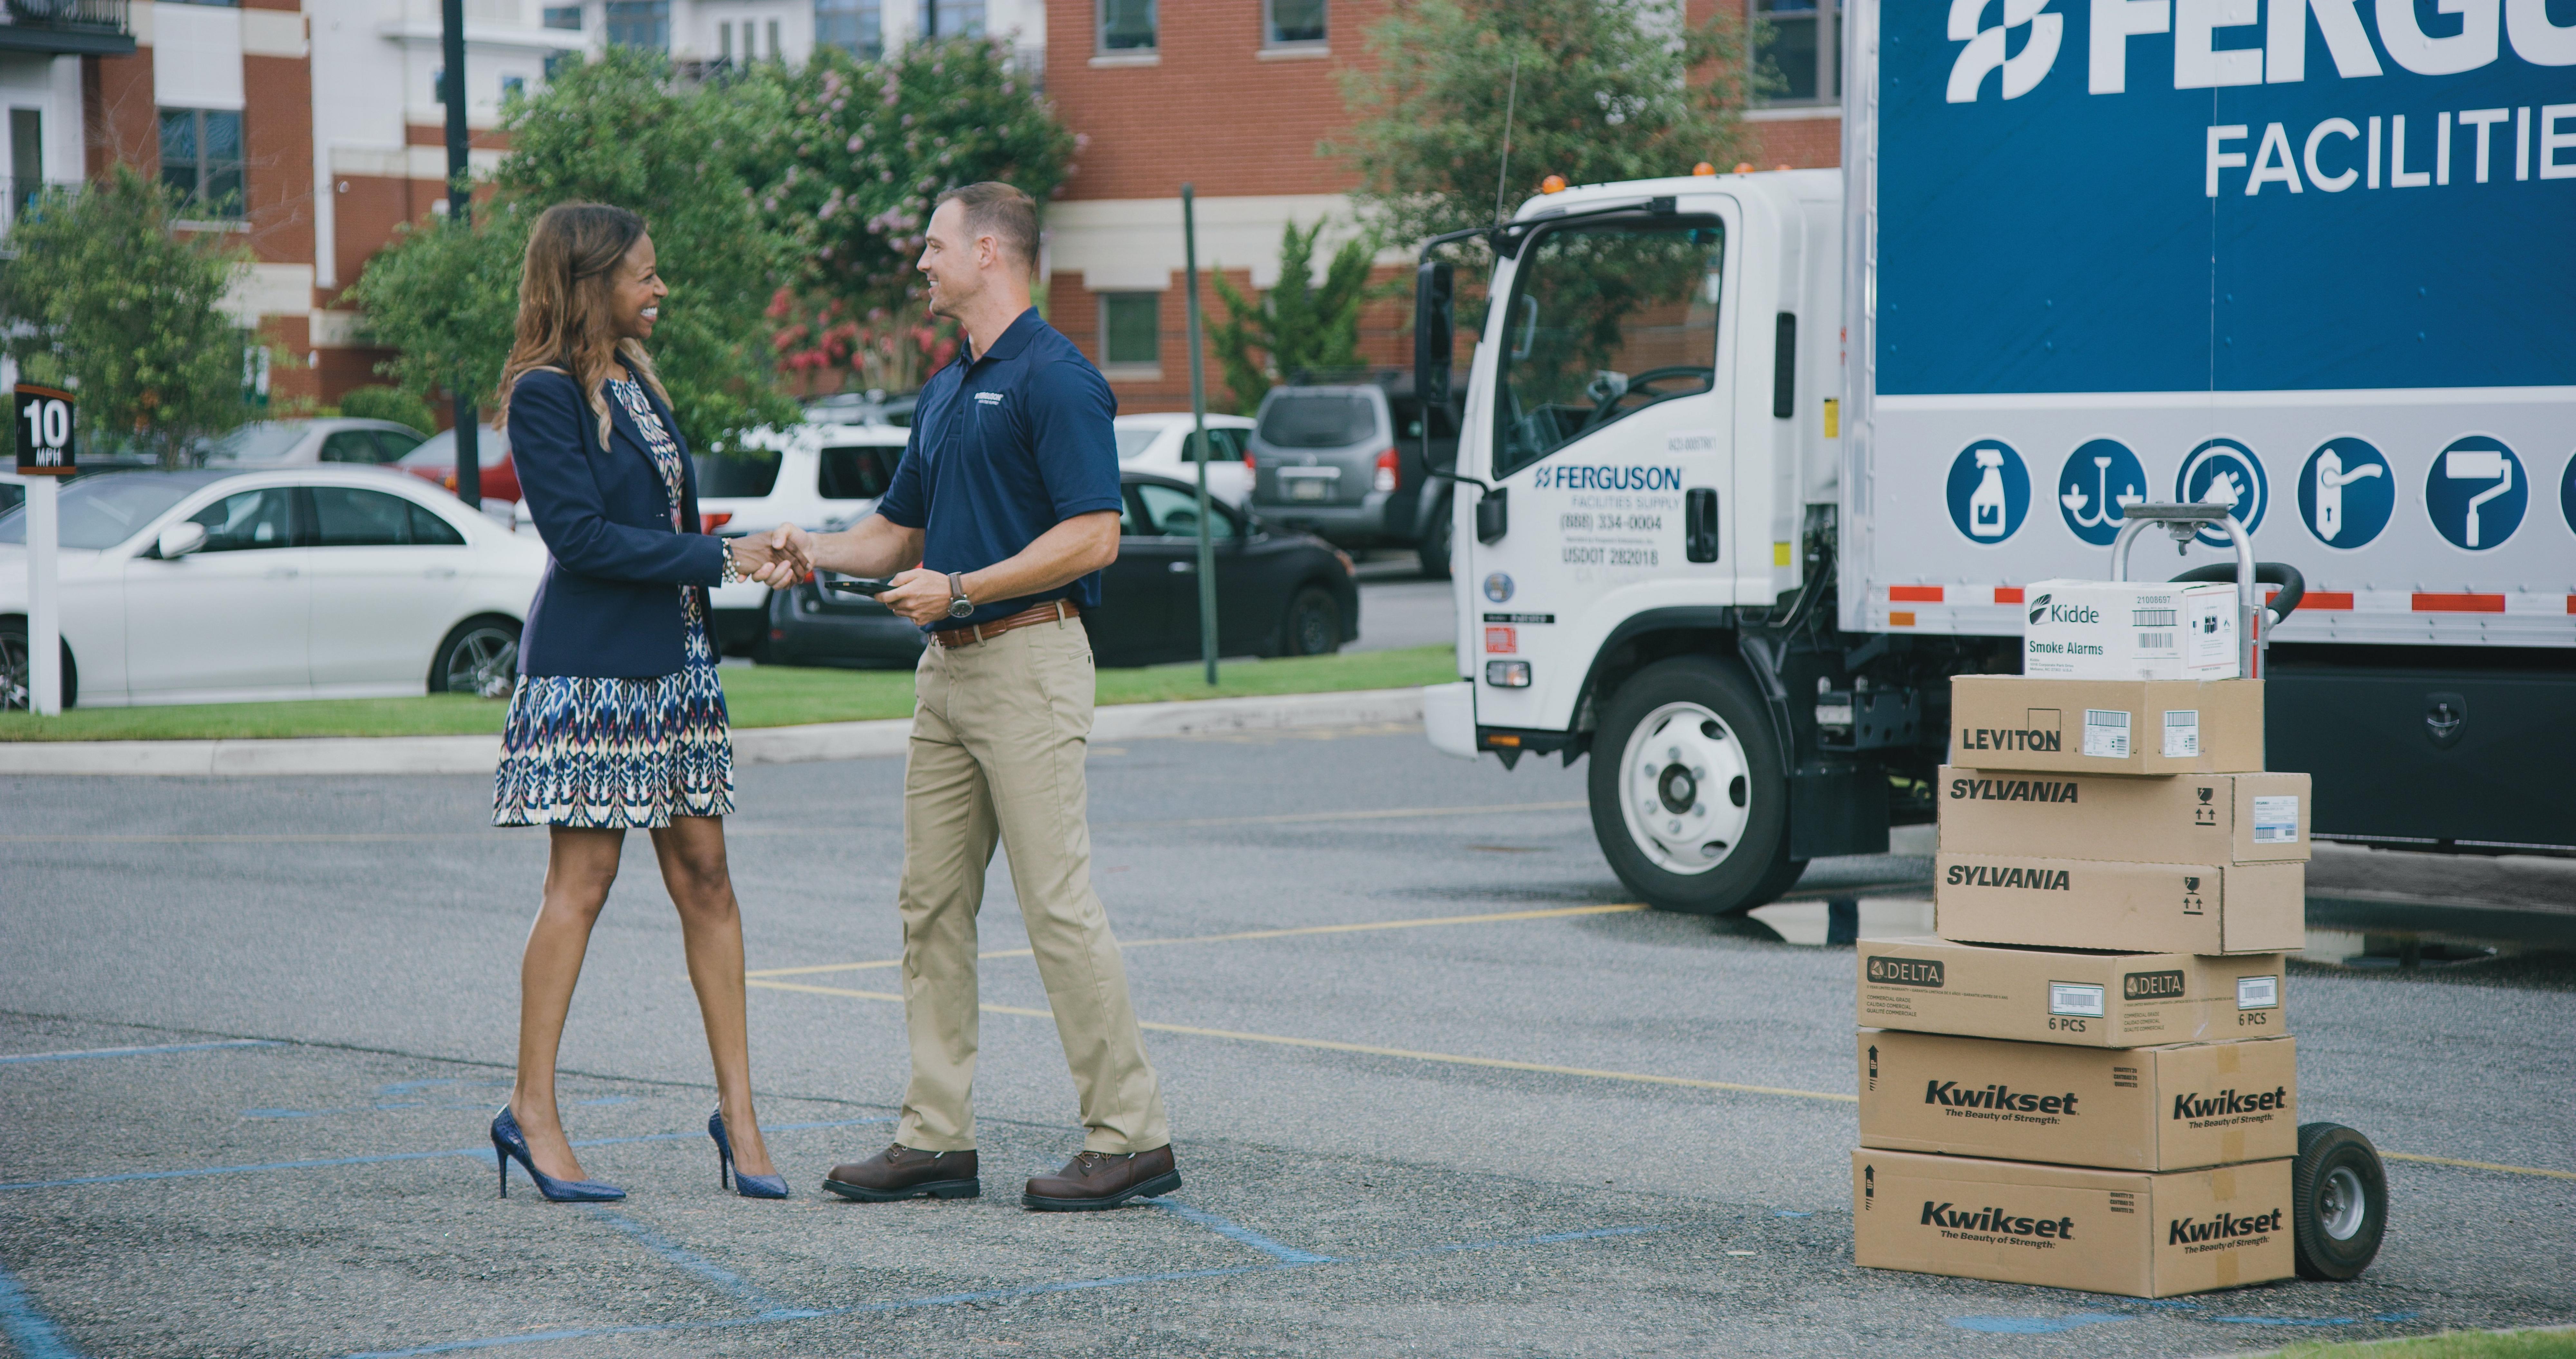 A Ferguson associate shakes hands with a customer in front of a parked delivery truck and several stacked boxes of products.